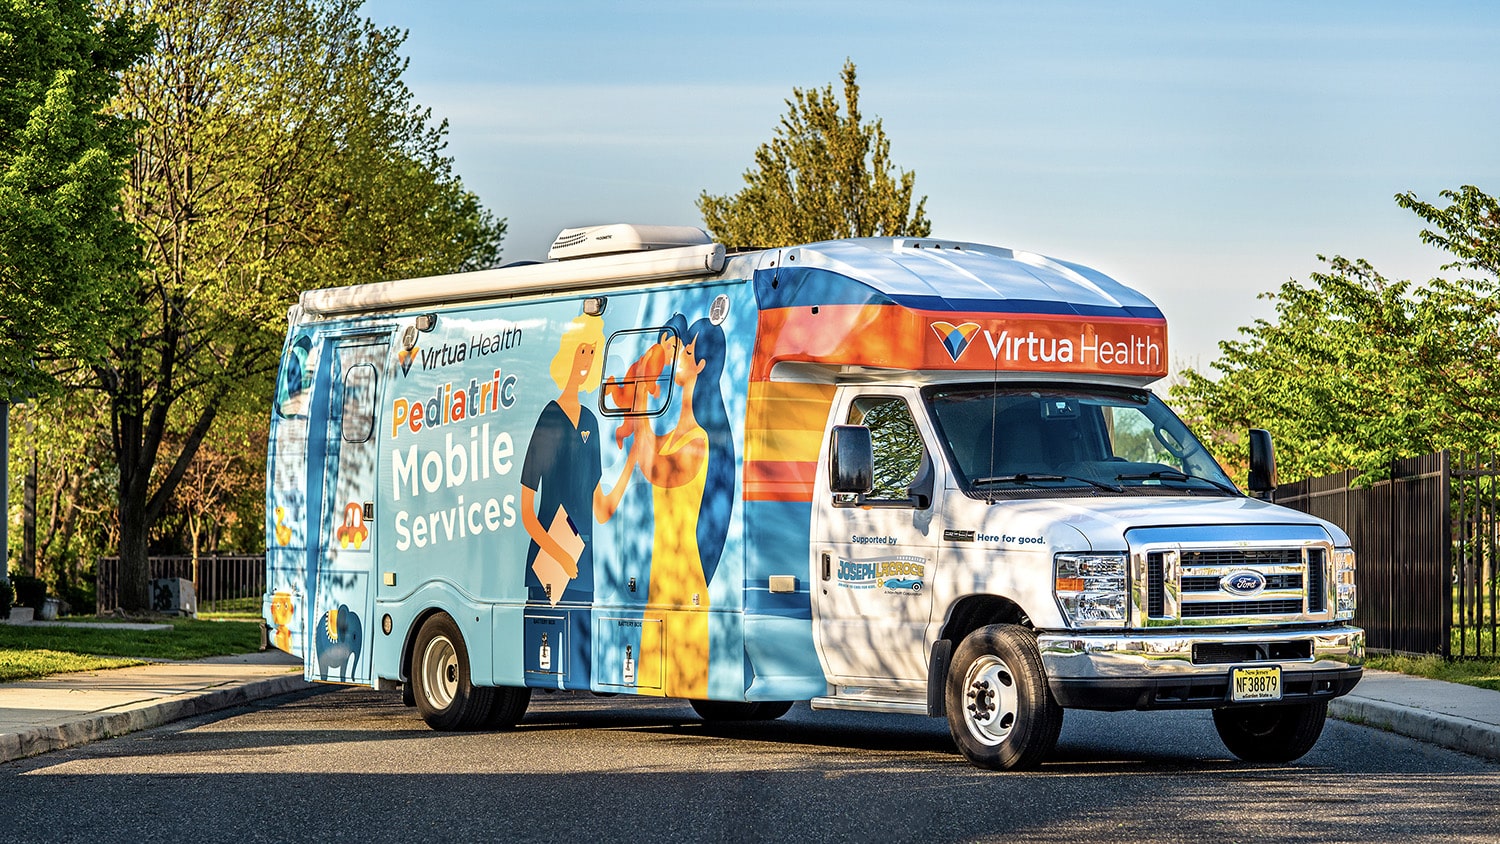 Pediatric Mobile Services Program truck parked outdoors